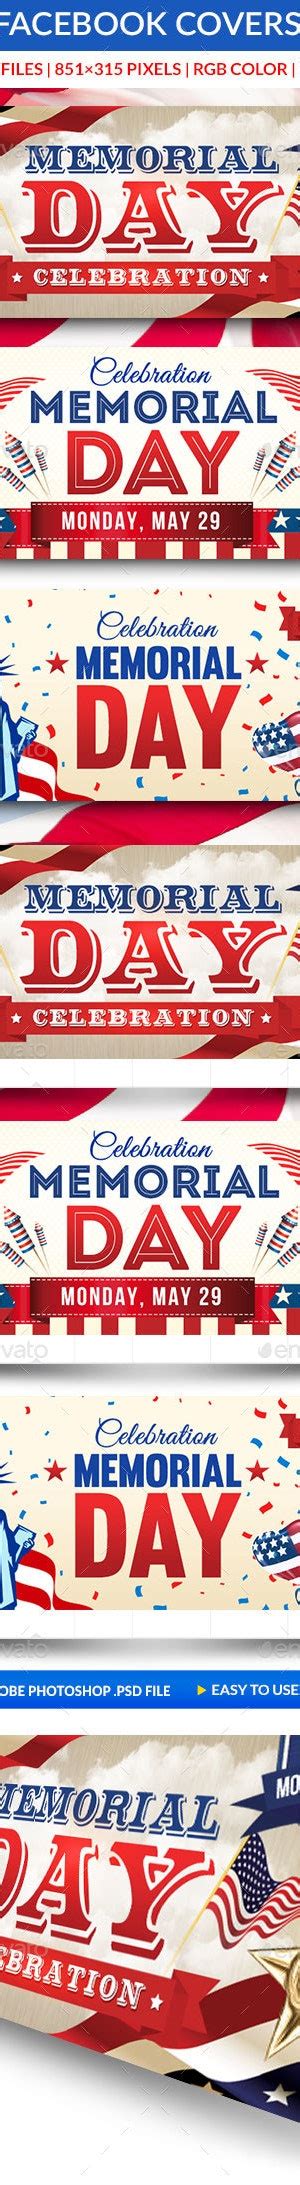 Memorial Day Facebook Covers By Briell Graphicriver